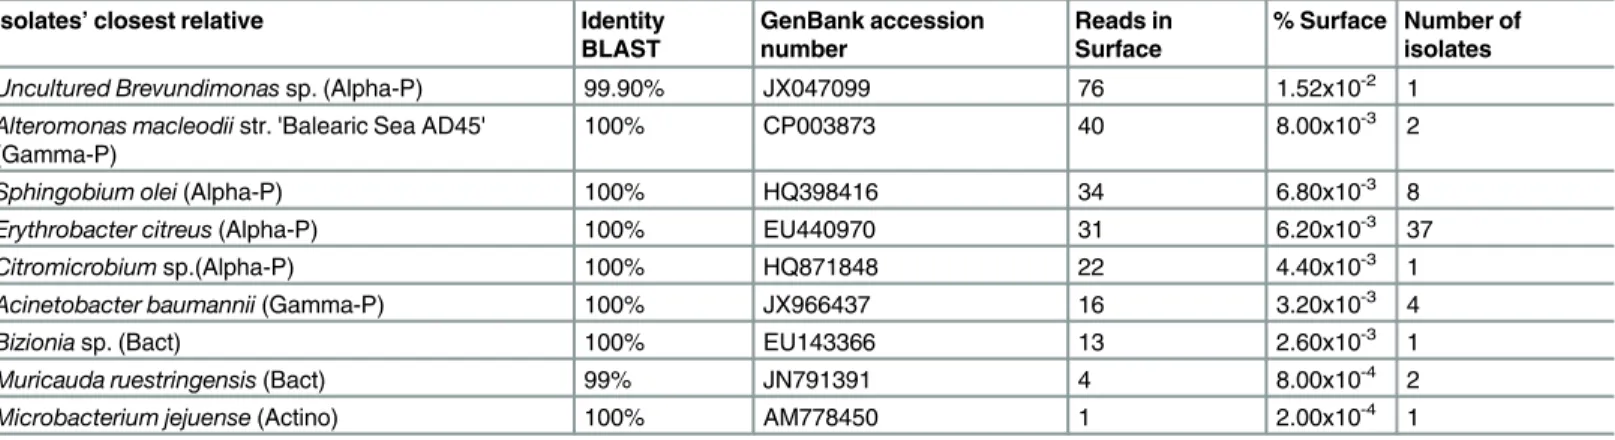 Table 2. Cultured isolates with matching HTS sequences. Columns show the isolates’ closest relatives according to the BLAST results, the percentage of identity with the BLAST reference strain (identity BLAST), the GenBank accession number of the BLAST refe